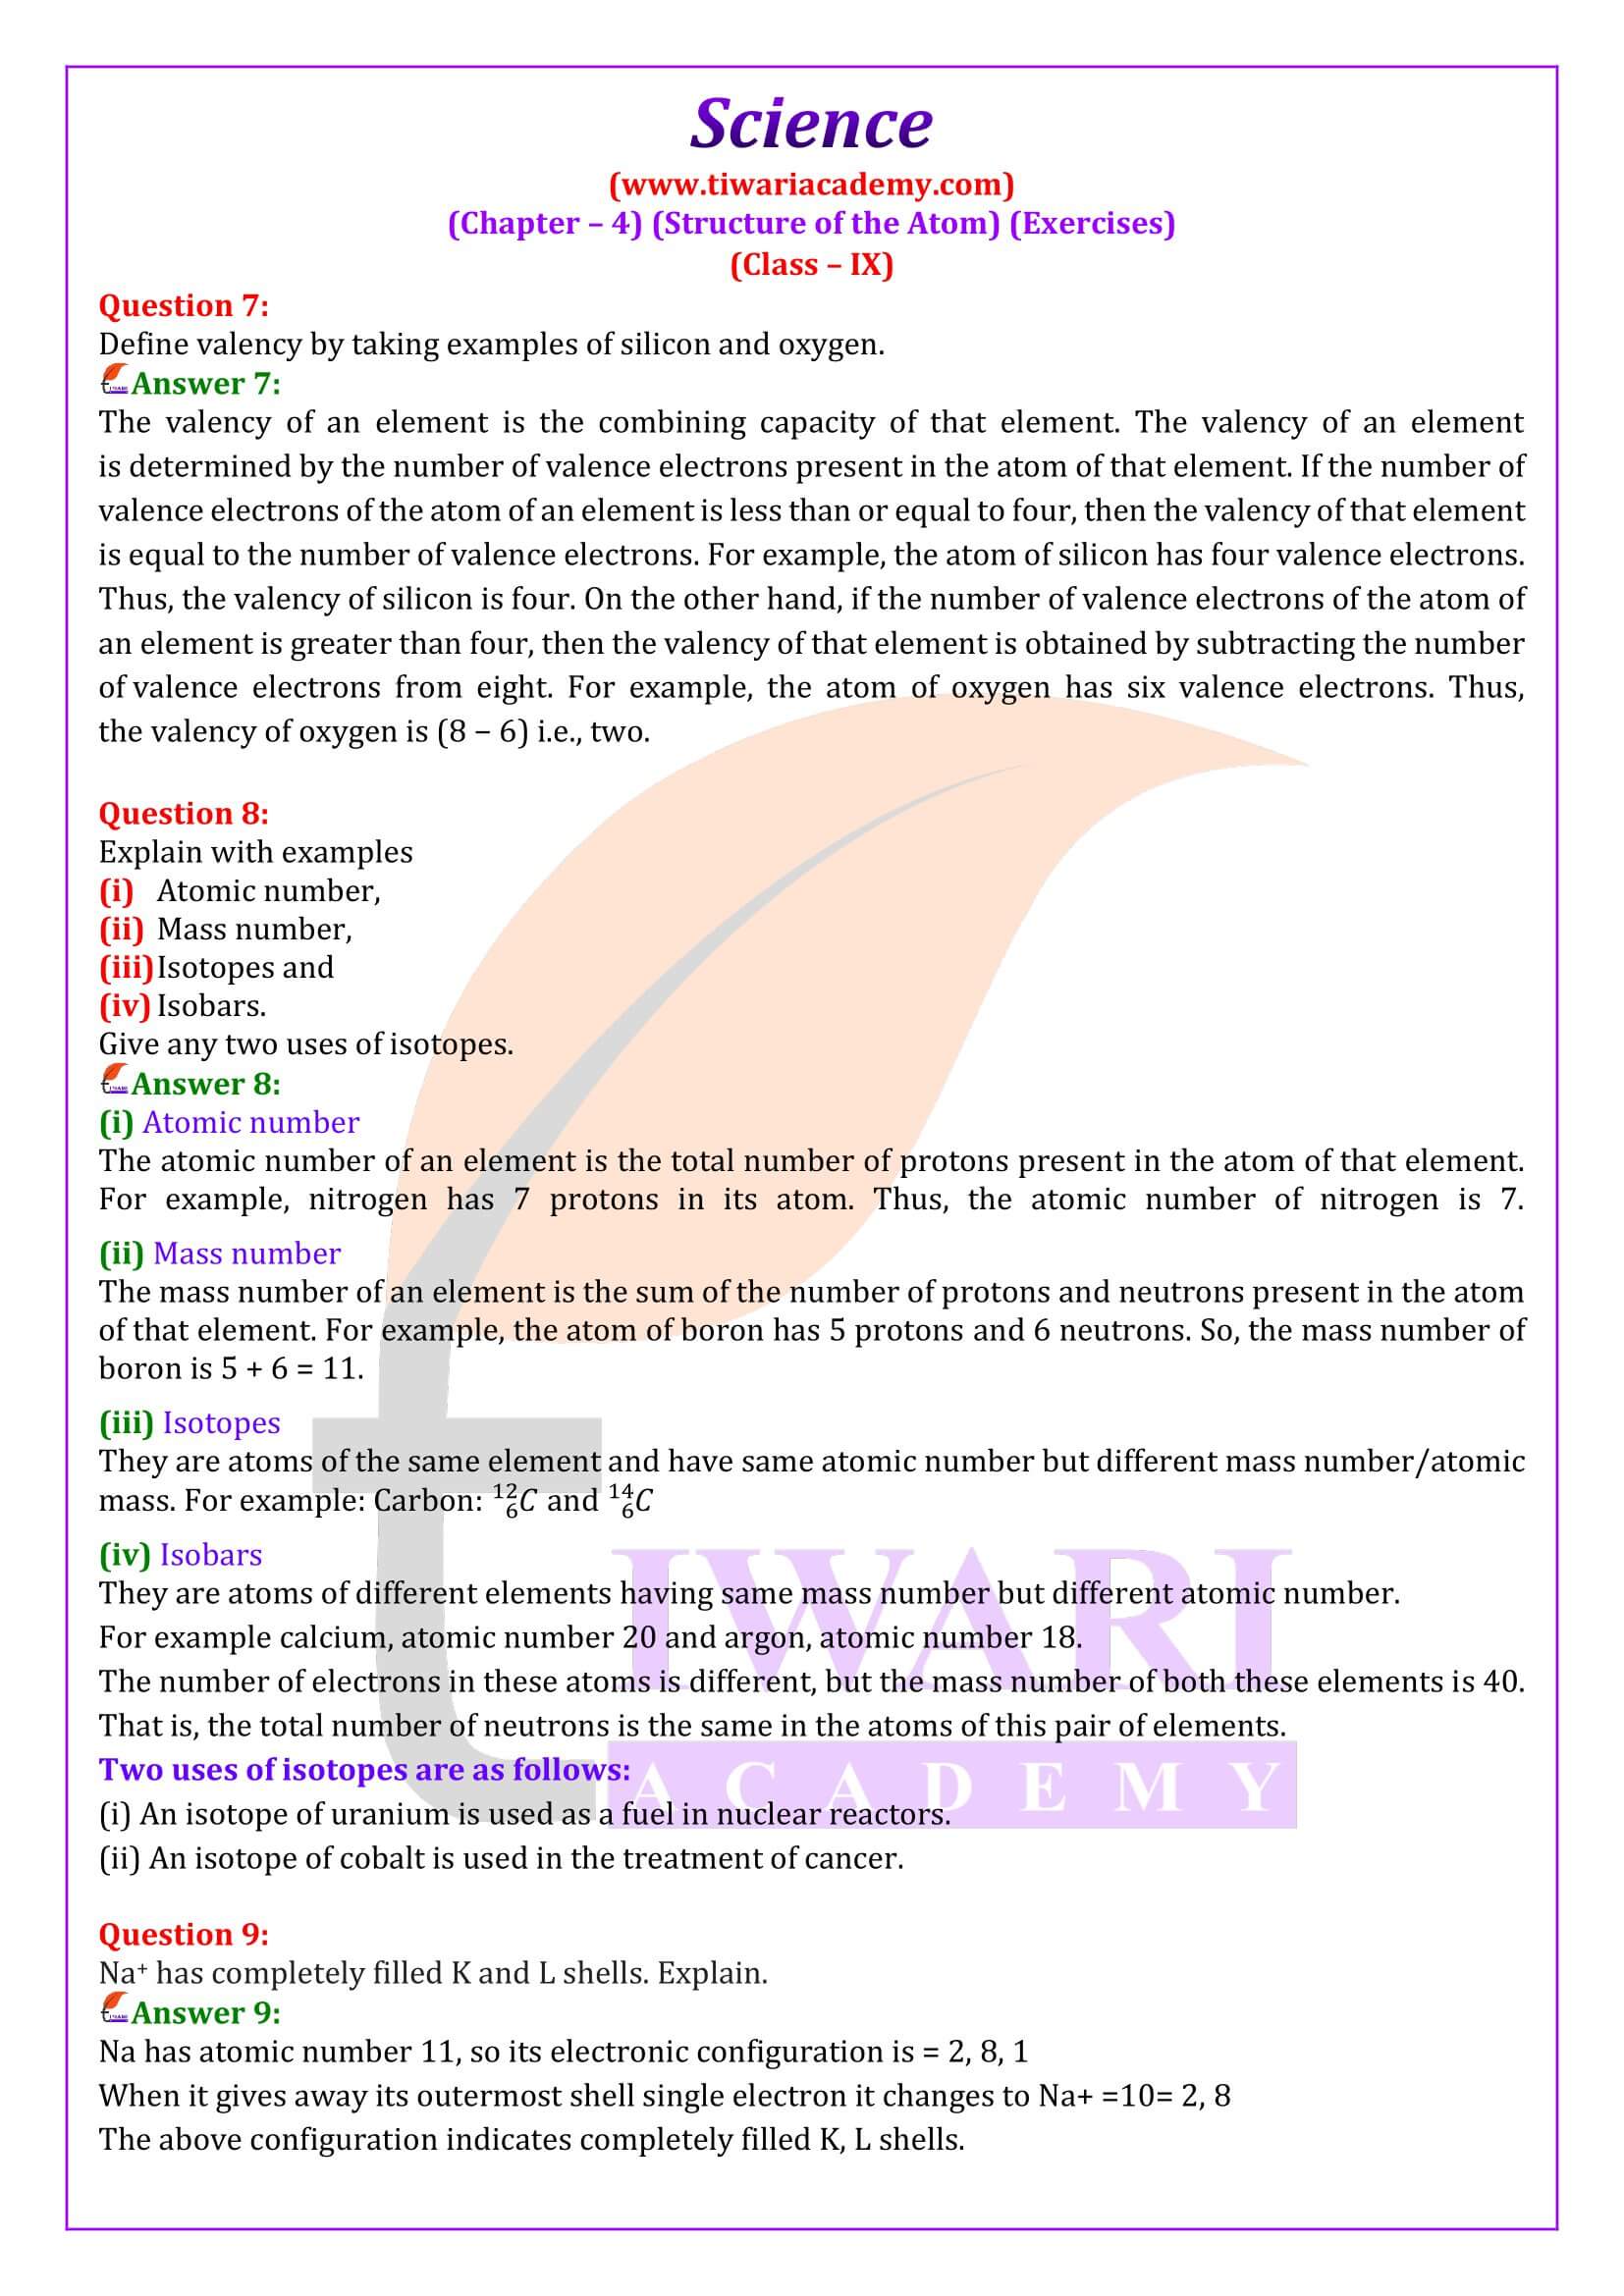 NCERT Solutions for Class 9 Science Chapter 4 Exercises